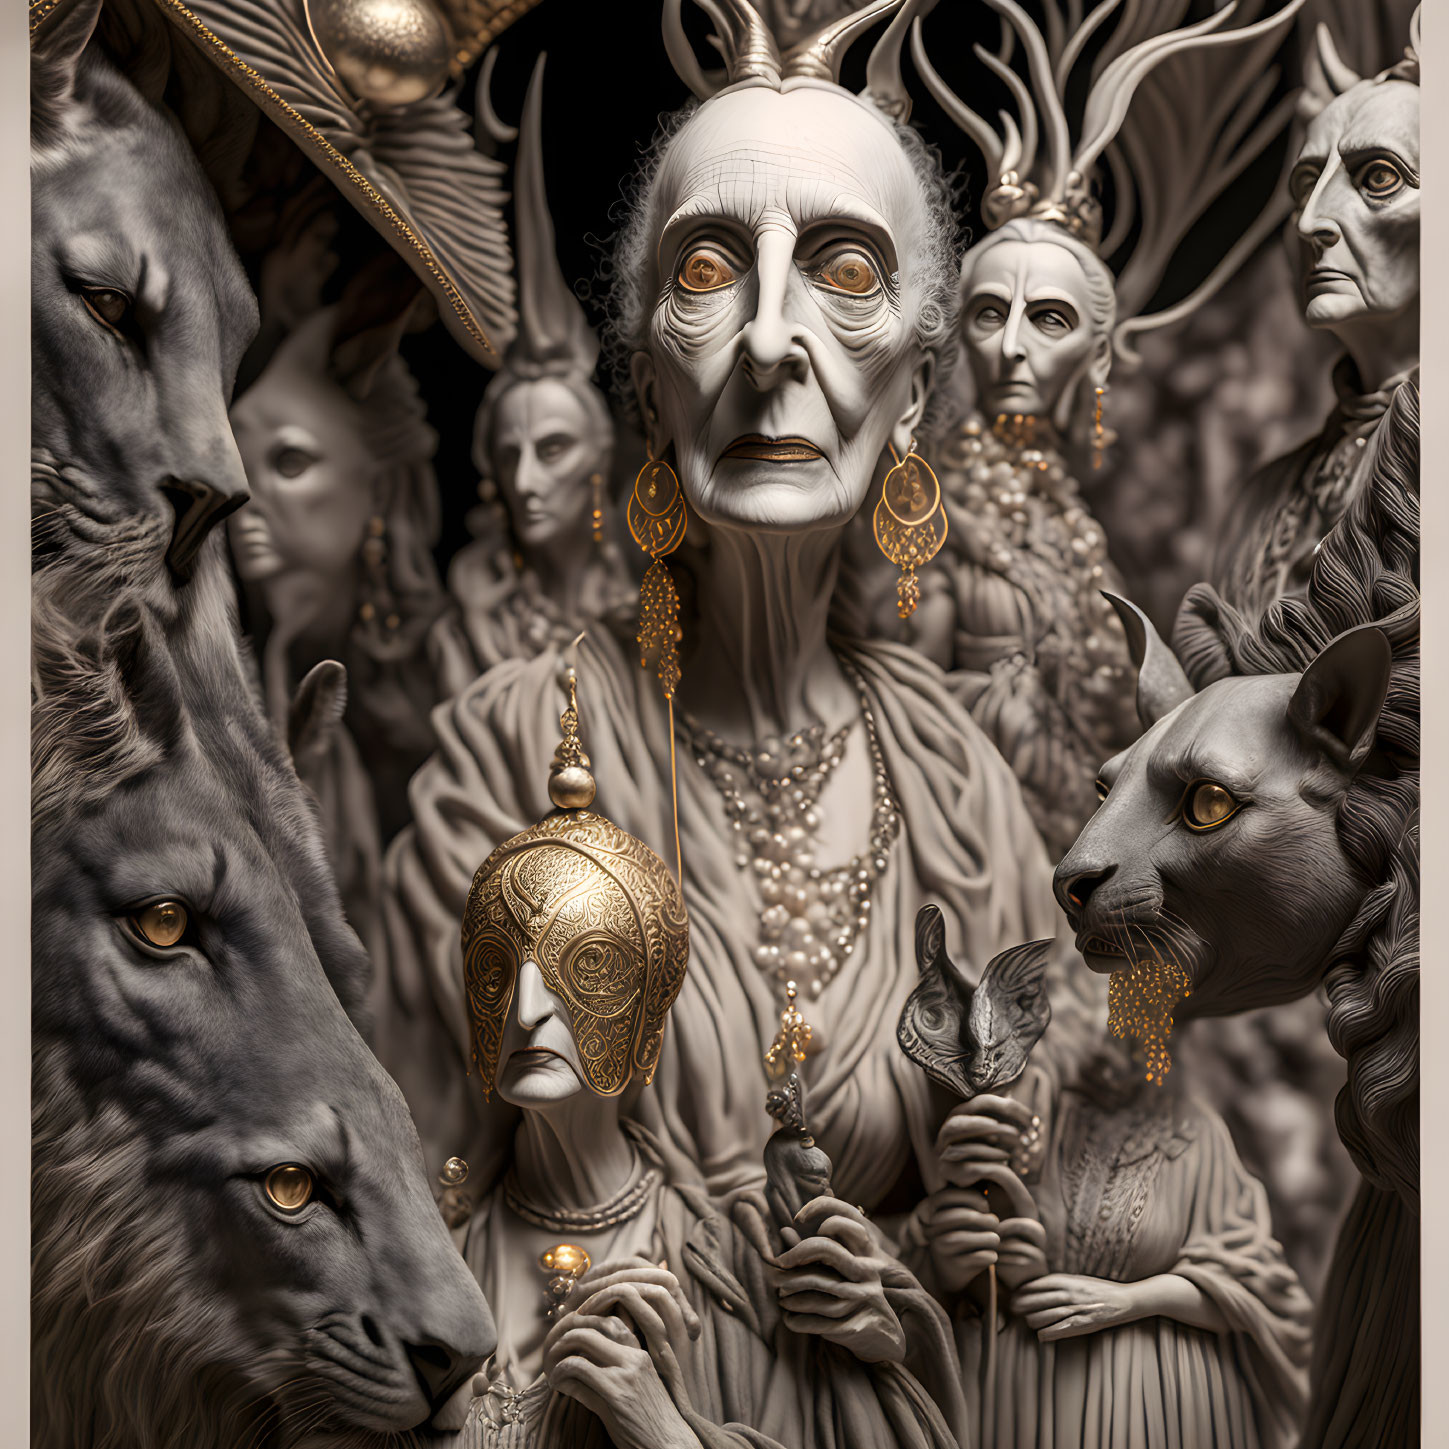 Monochromatic artwork with elderly figure, wolves, and enigmatic characters